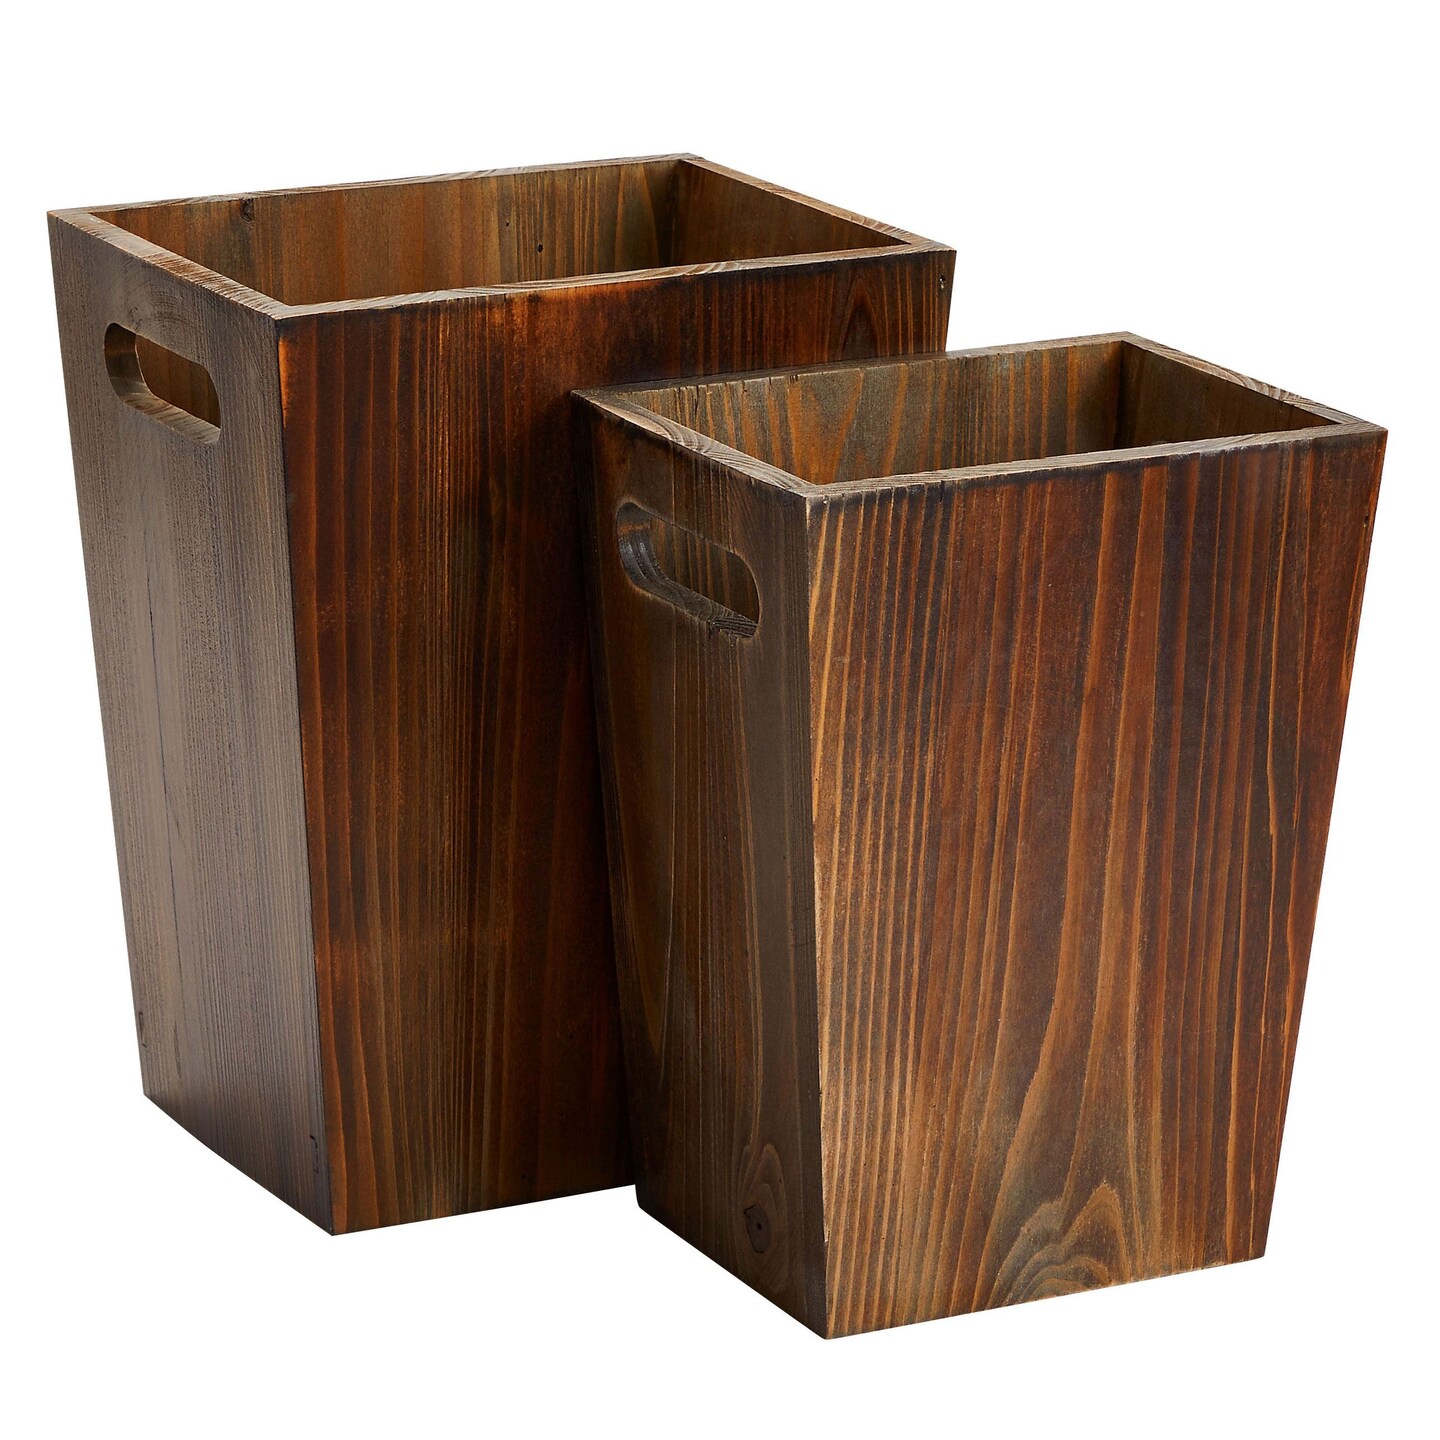 2 Piece Rustic Style Wood Trash Can Set, Farmhouse Square Wastebasket Bin with Handles for Home or Office (Brown, Small &#x26; Large)